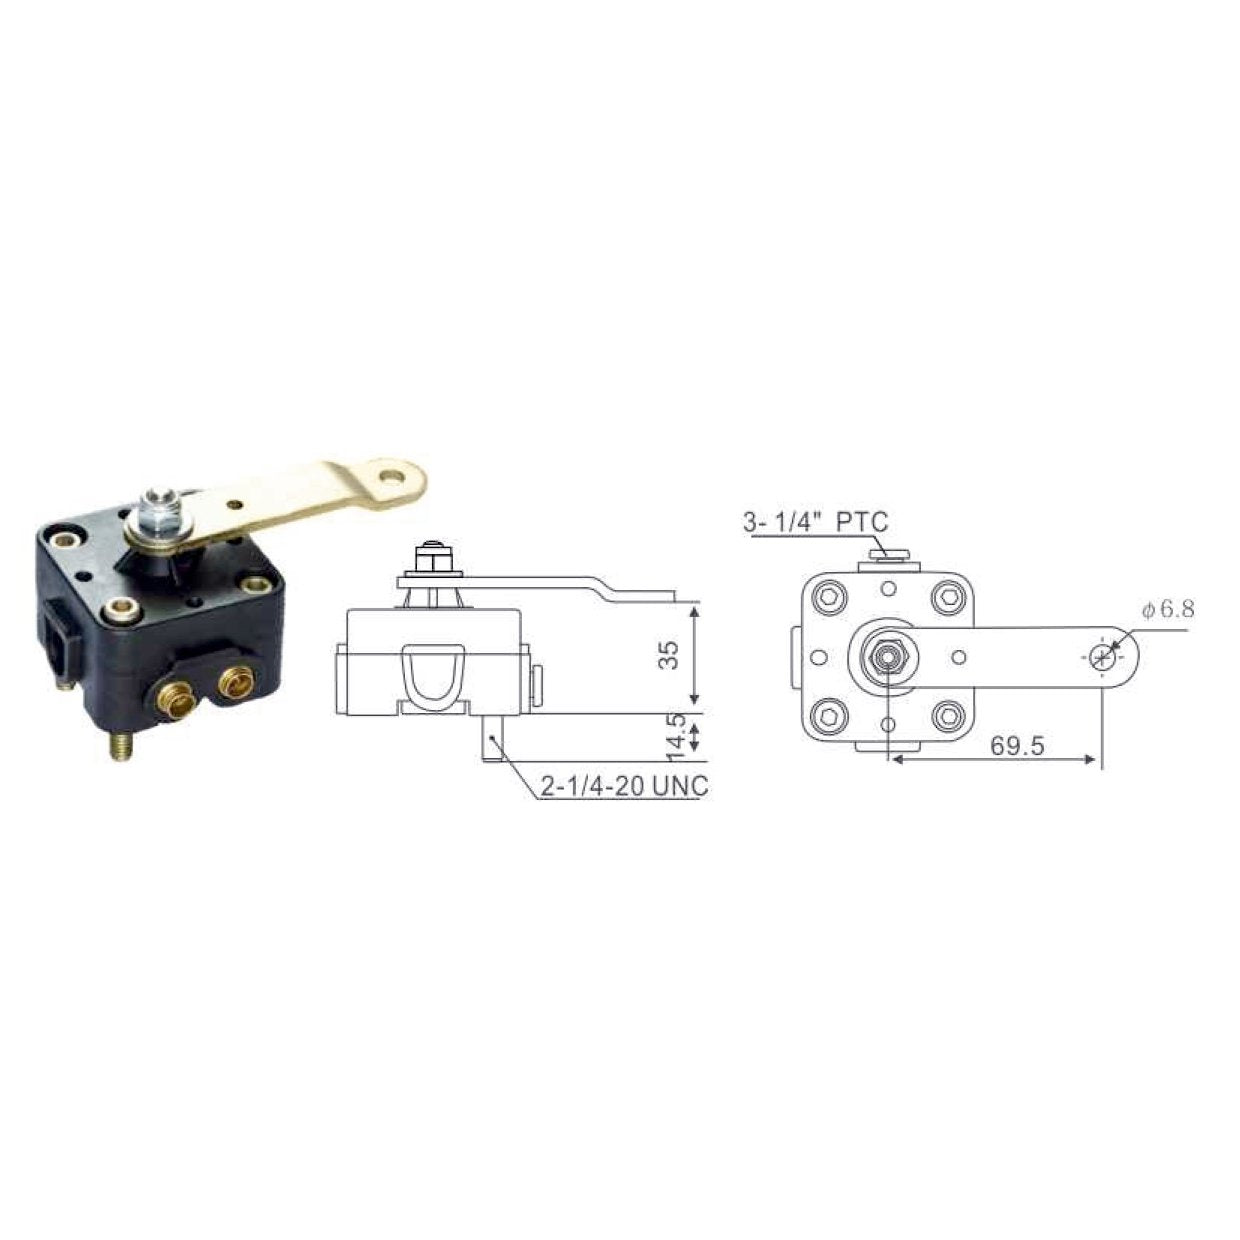 Fortpro Height Control Valve, 1/4" Push to Connect Ports, Replacement for Barksdale KD2262 | F245609